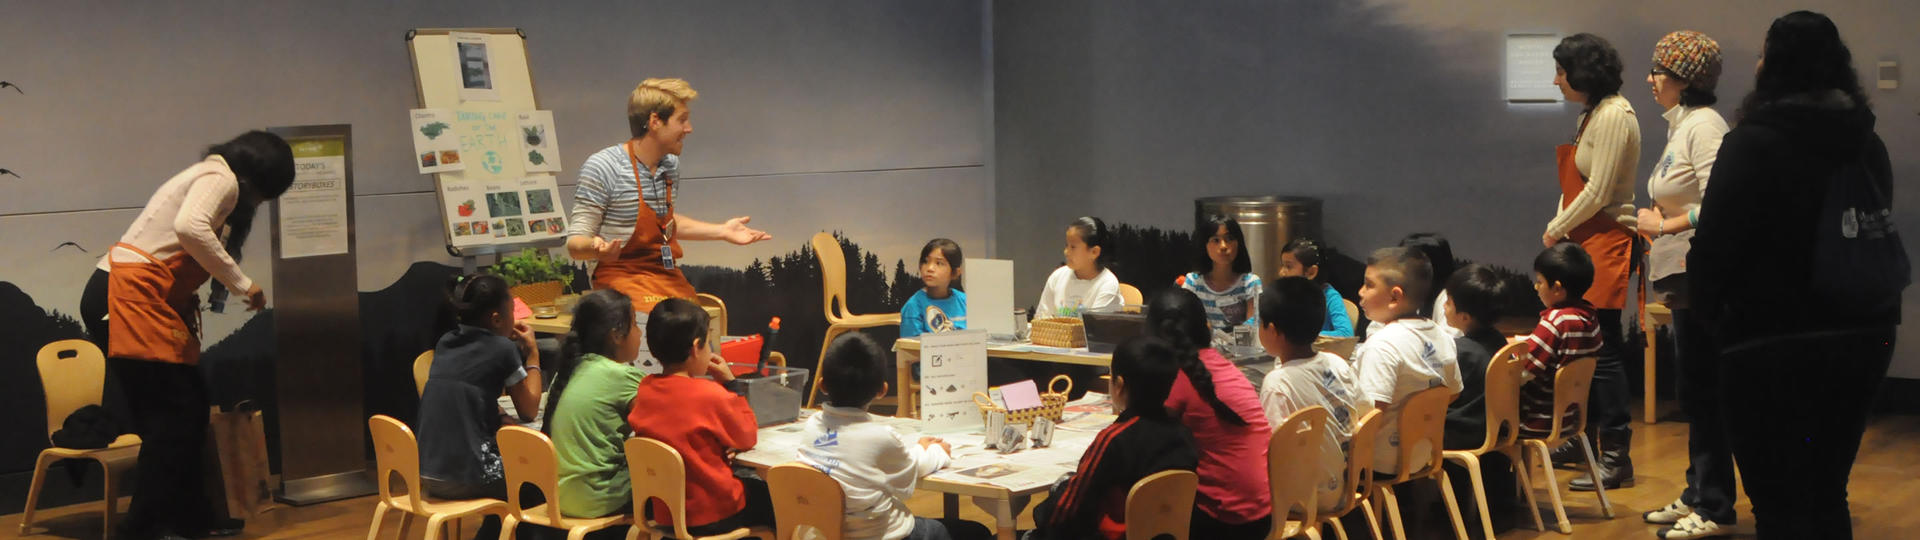 Instructor talking to young children seated around a u-shaped table